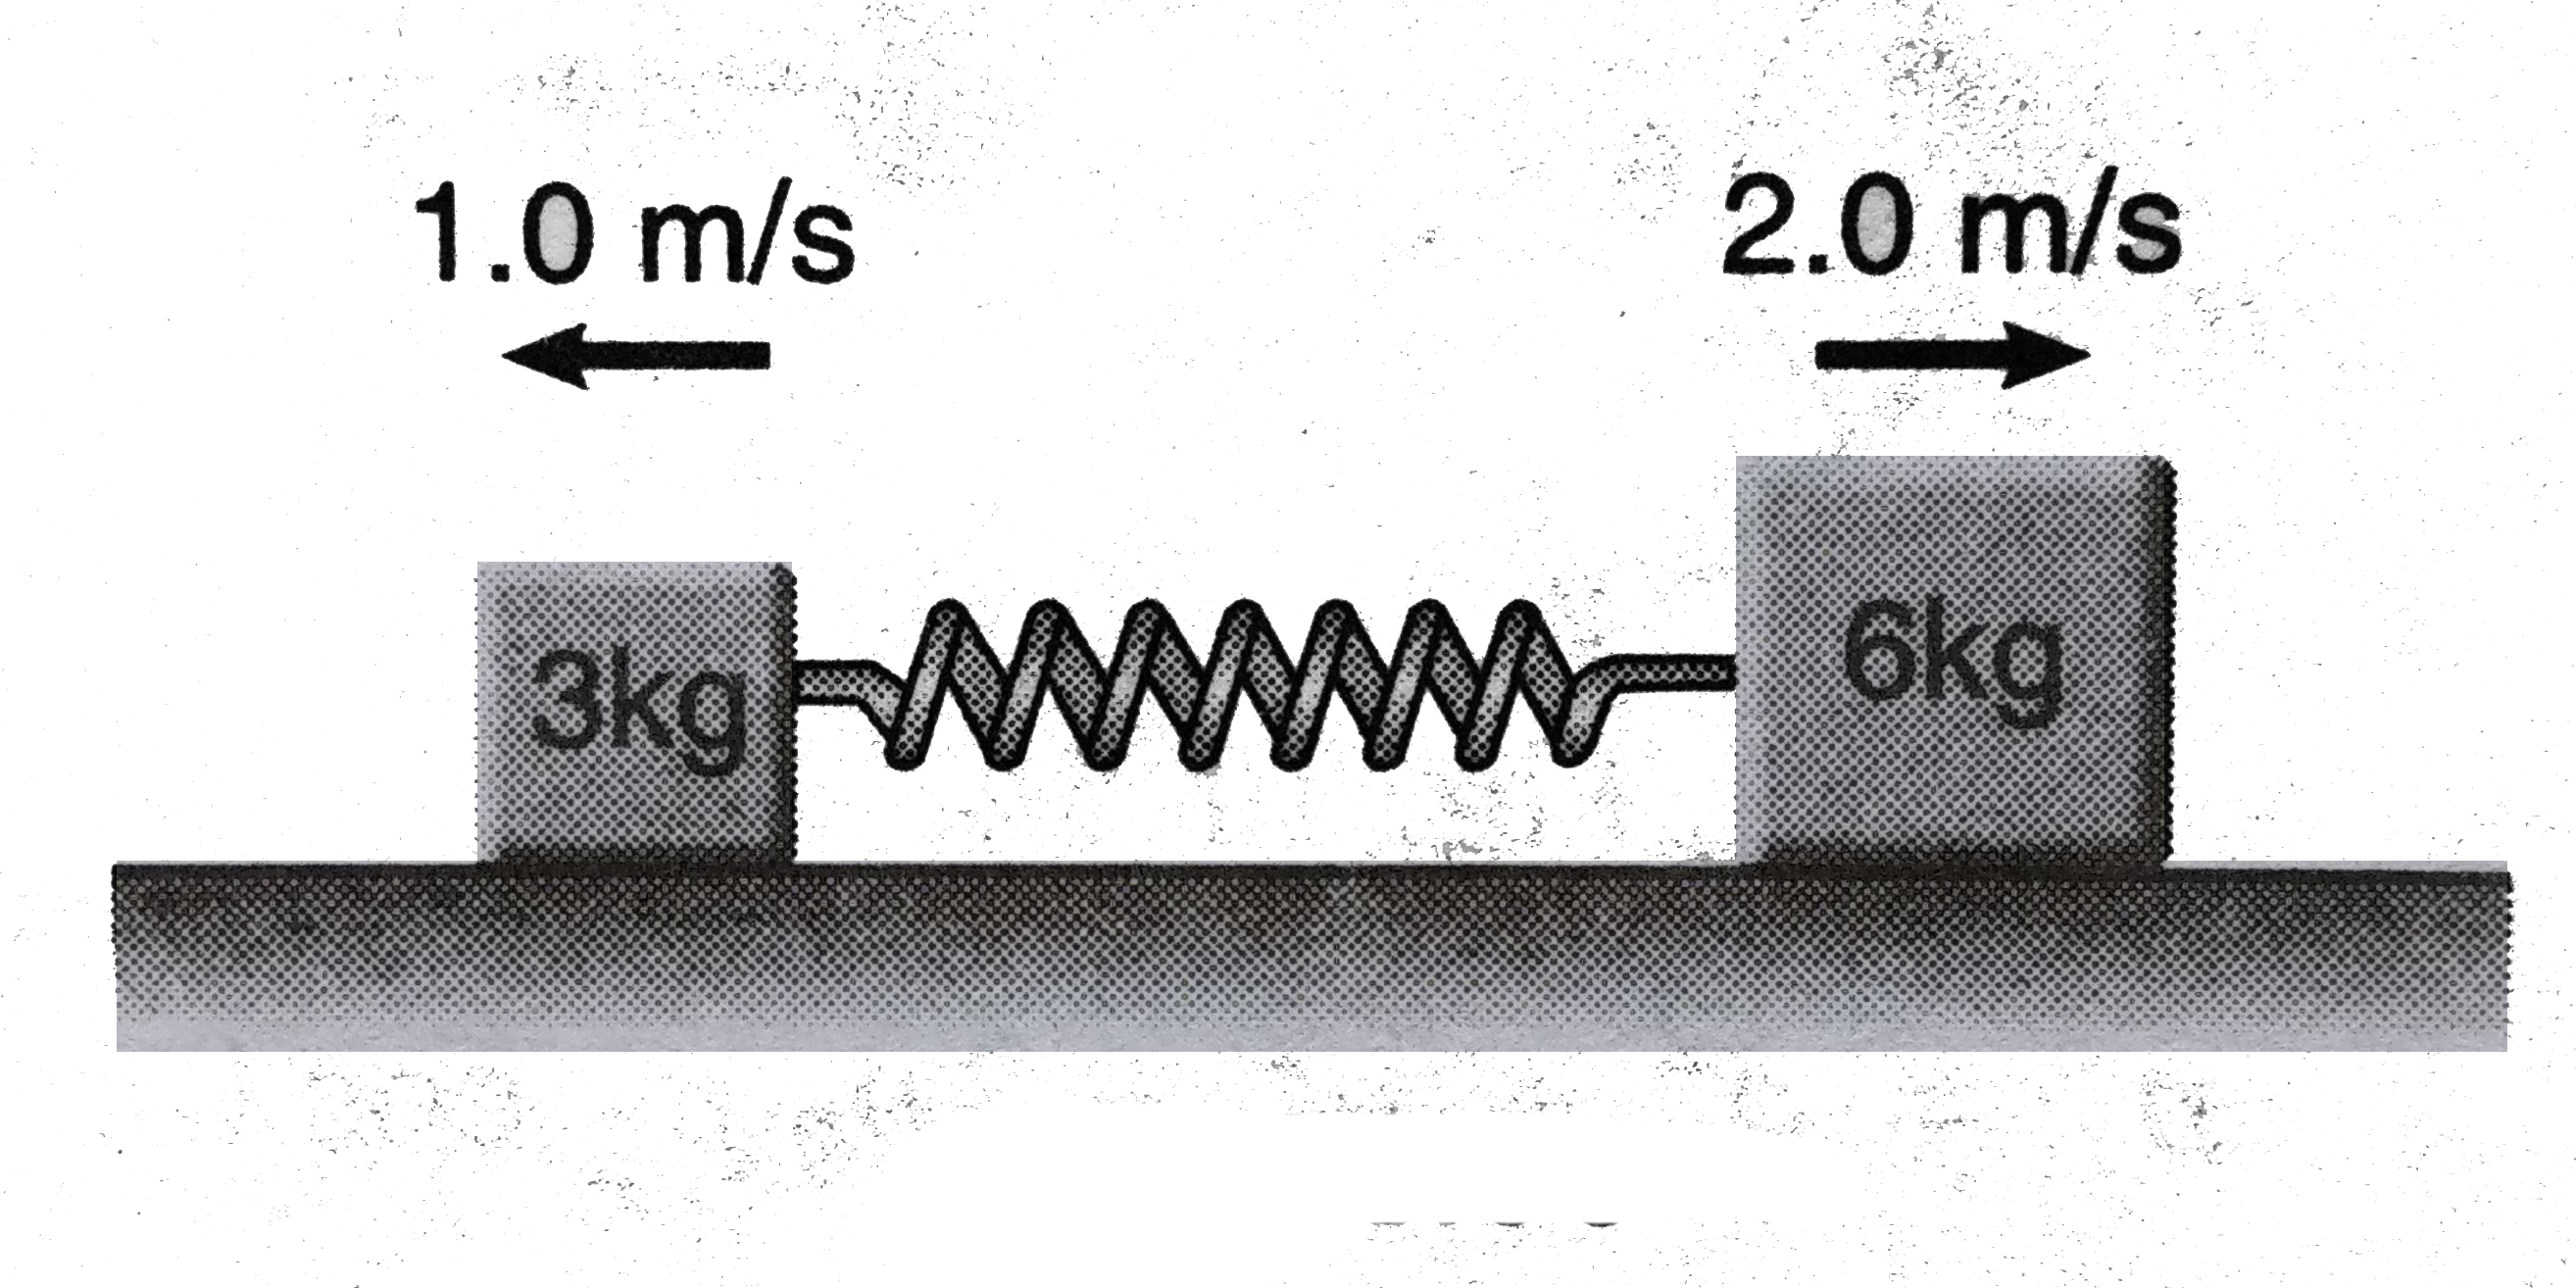 Two blocks of masses 3kg and 6kg respectivley are placed on a smooth horizontal surface. They are connected by a light spring of force constant k=200N//m. Initially the spring is unstretched. The indicated velocities are imparted to the blocks. Find the maximum extension of the spring.